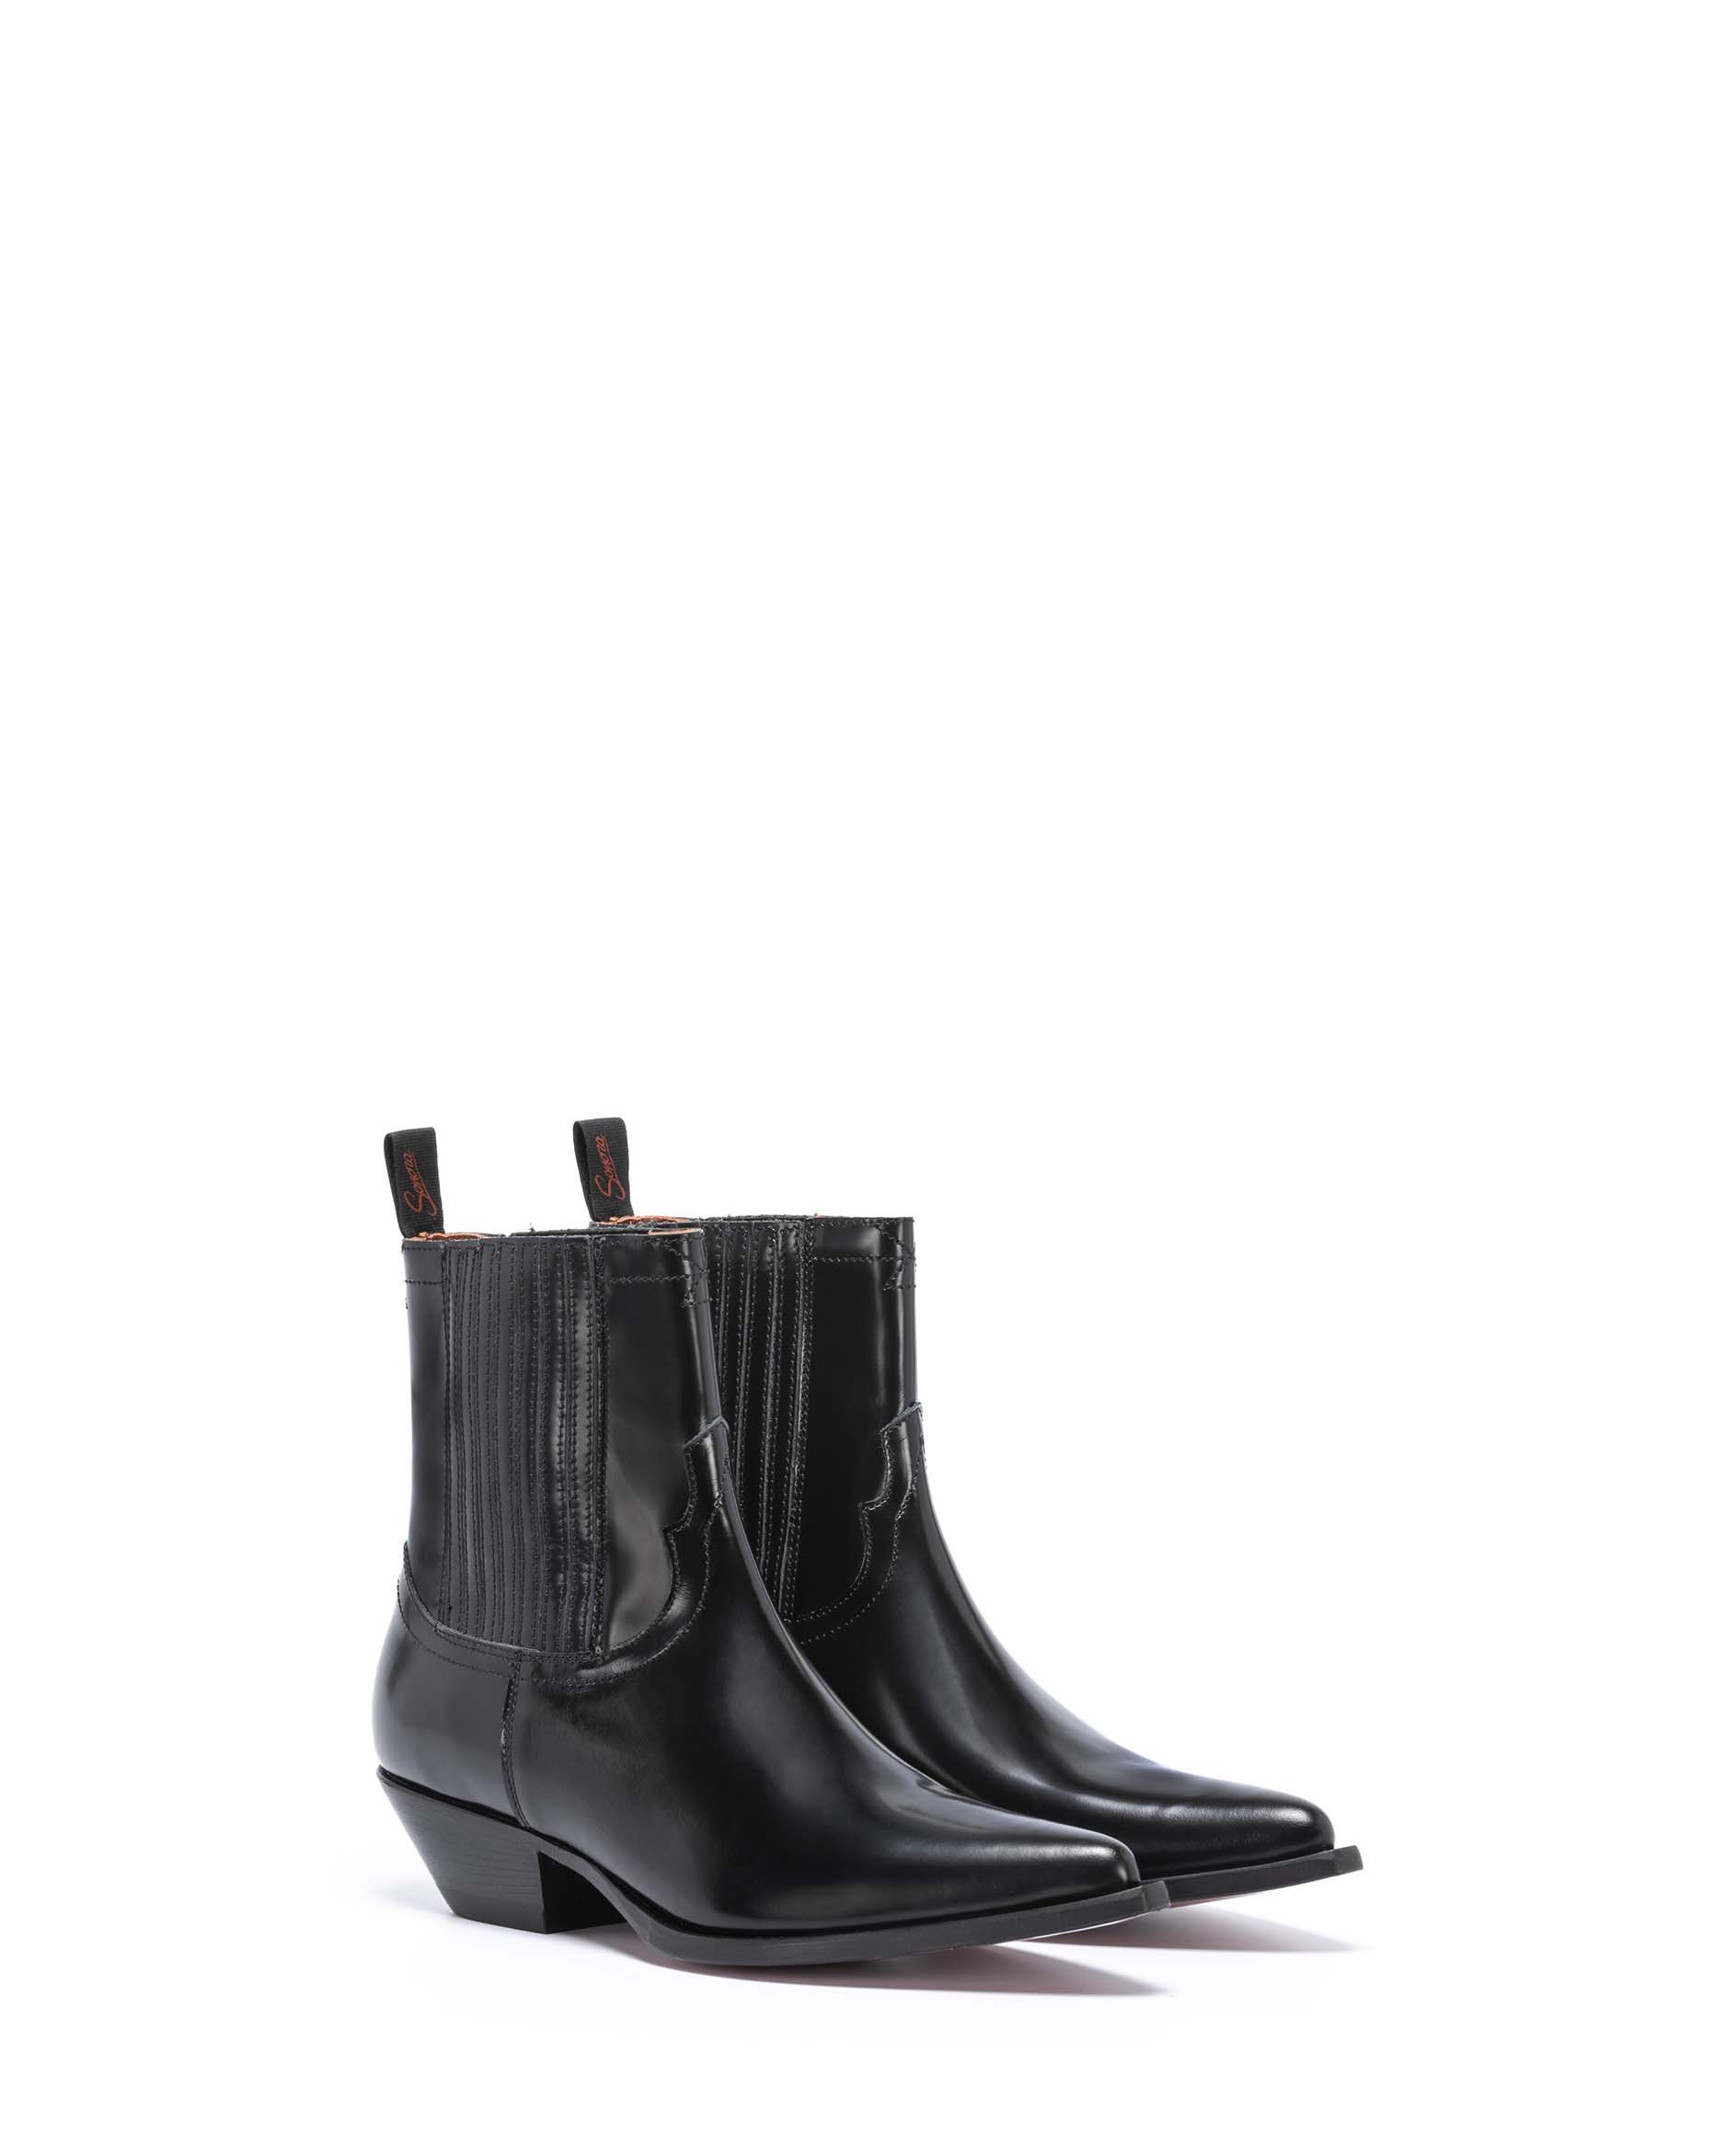 HIDALGO Women's Ankle Boots in Black Brushed Calfskin_Front_01